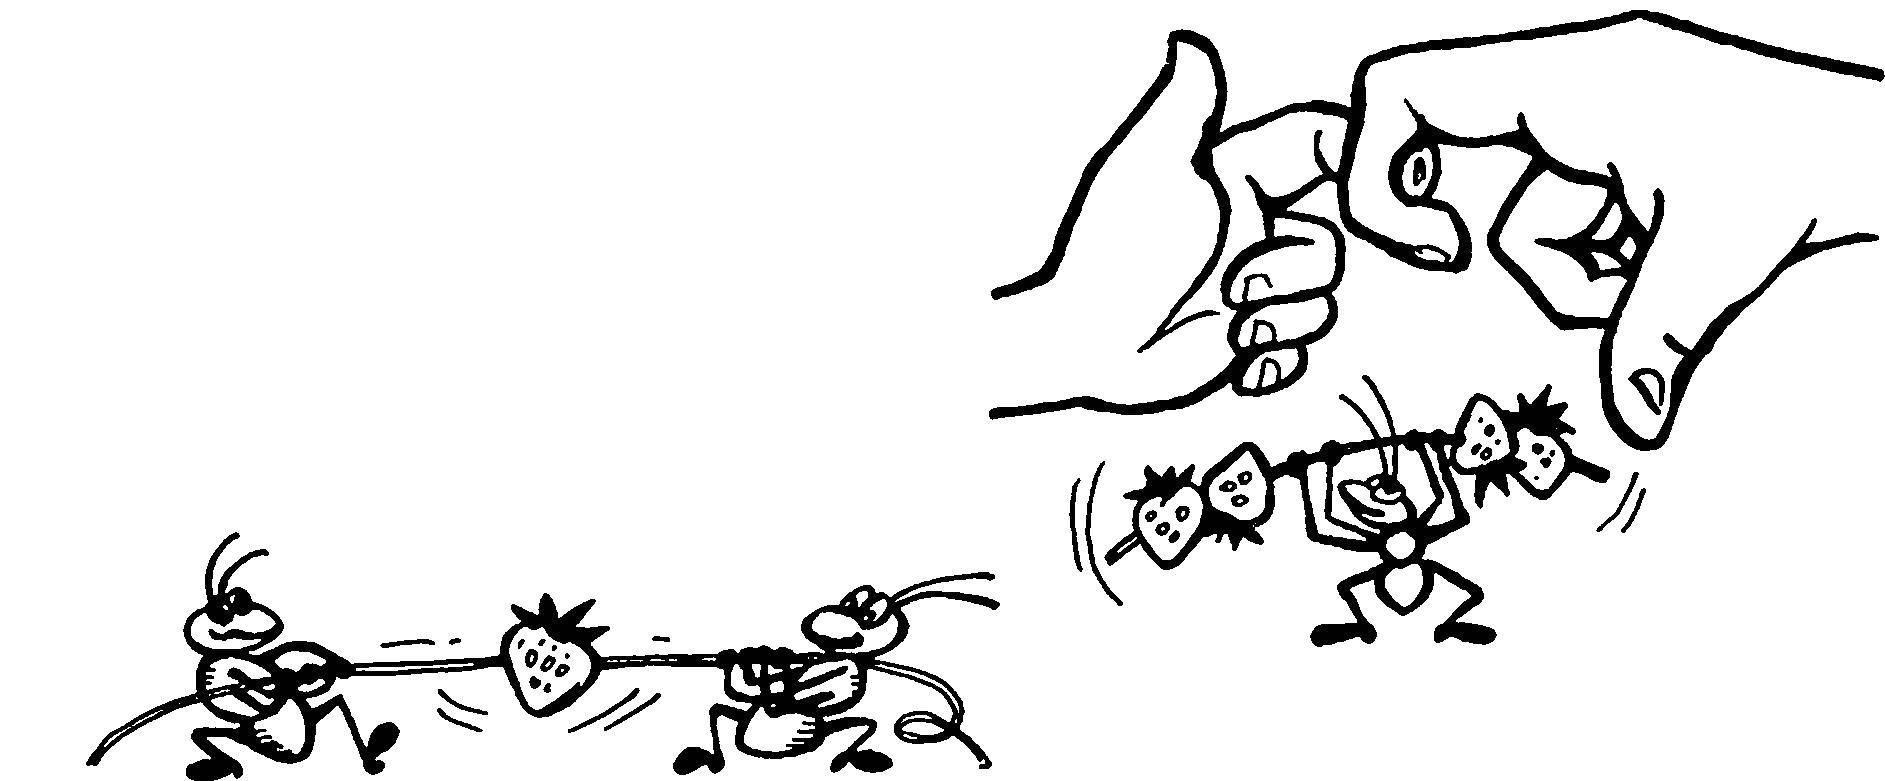 Coloring Ant and hands. Category hand. Tags:  hands, ant.